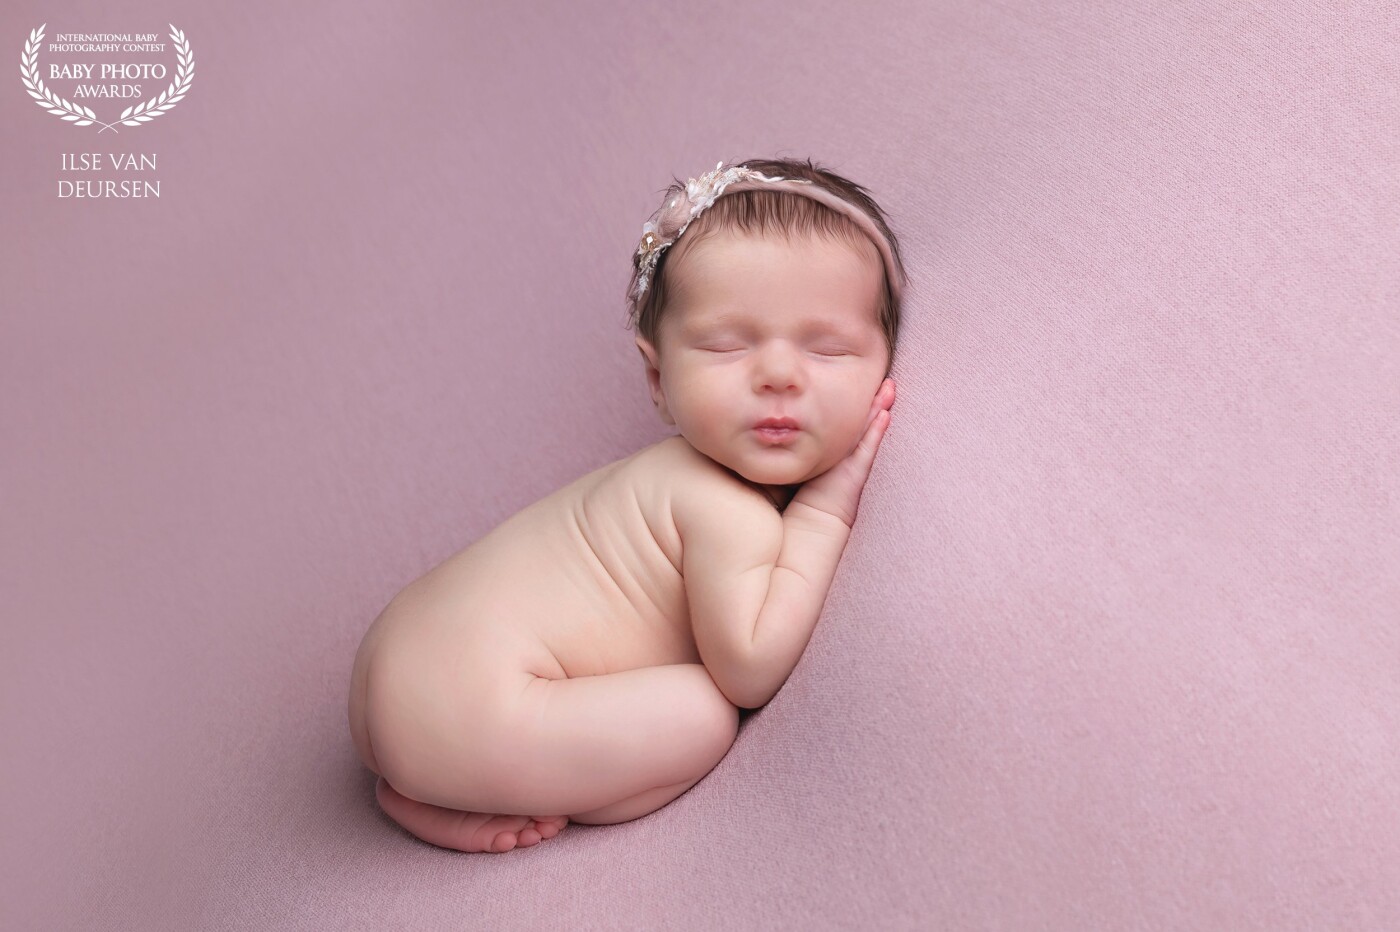 No words for this little beautiful girl. She was just so cute, my heart was melting.<br />
And she slept like a little princess through the whole session. A real gift for the photographer.